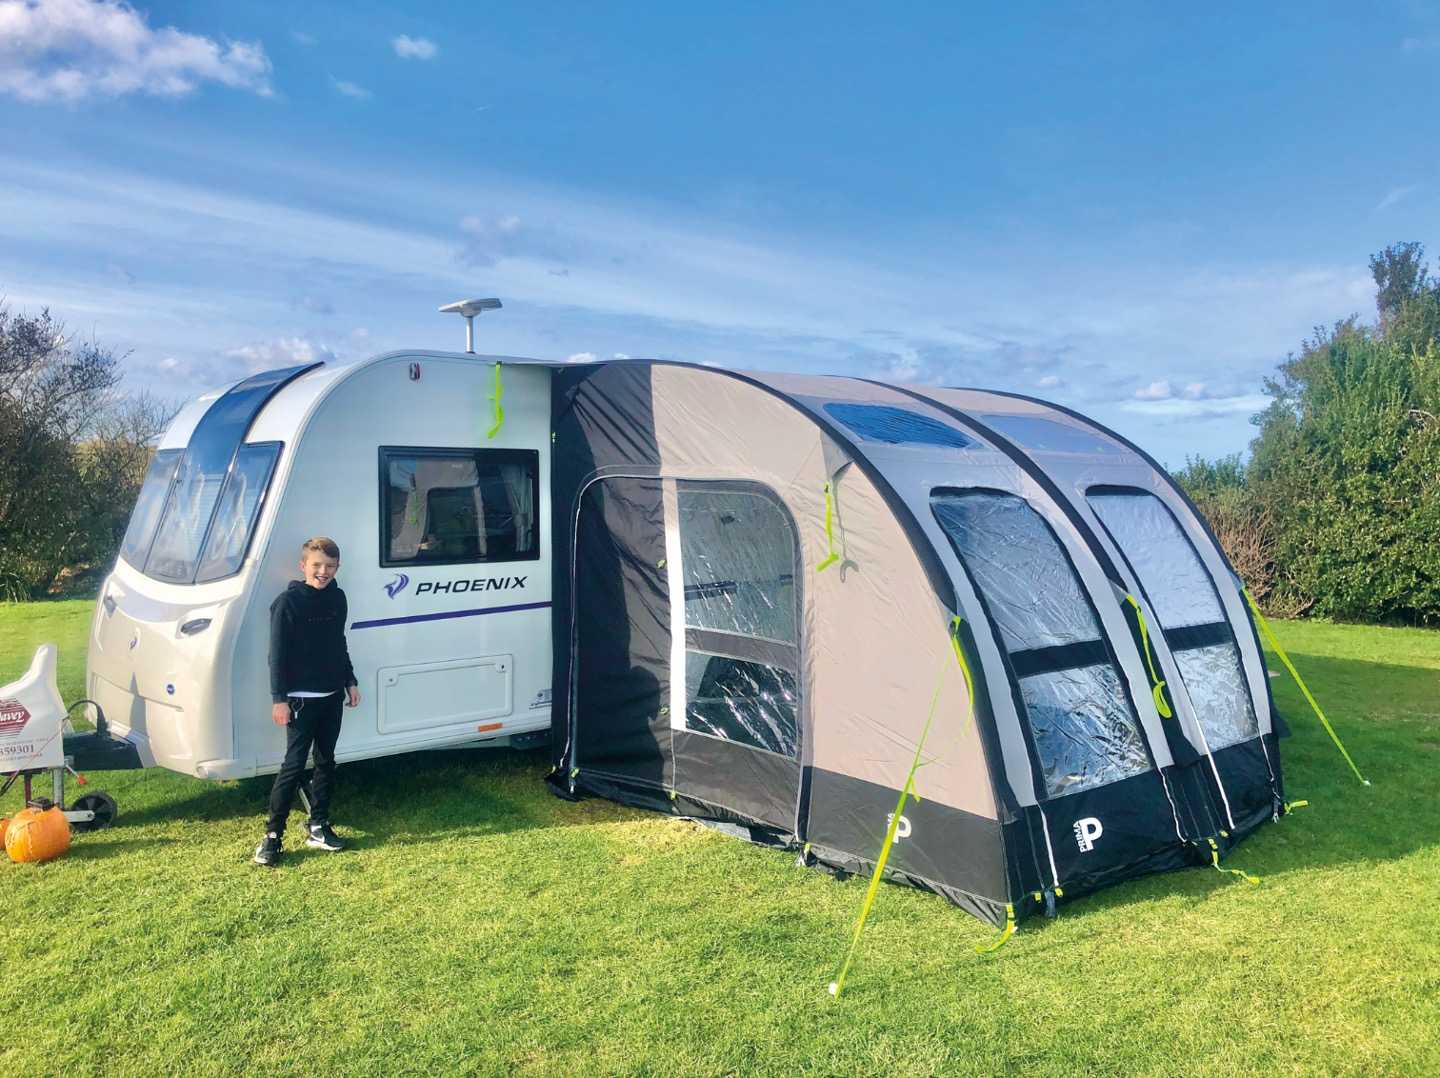 A pitched caravan awning